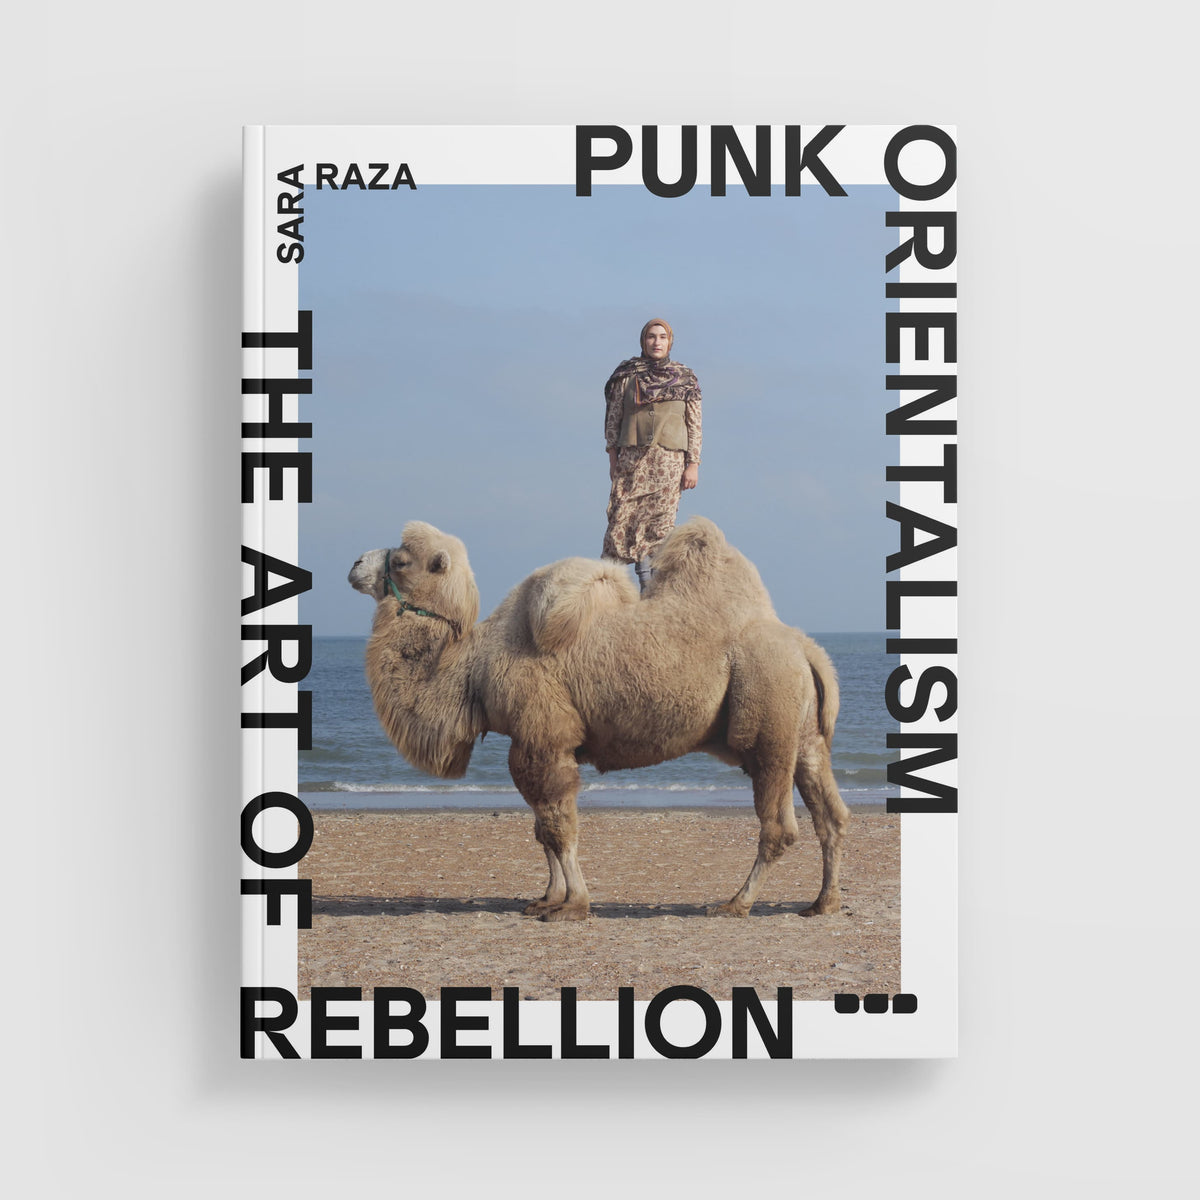 A person stands on a camel at the beach, featured on the cover of a book titled "Punk Orientalism: The Art of Rebellion" by Black Dog Online.